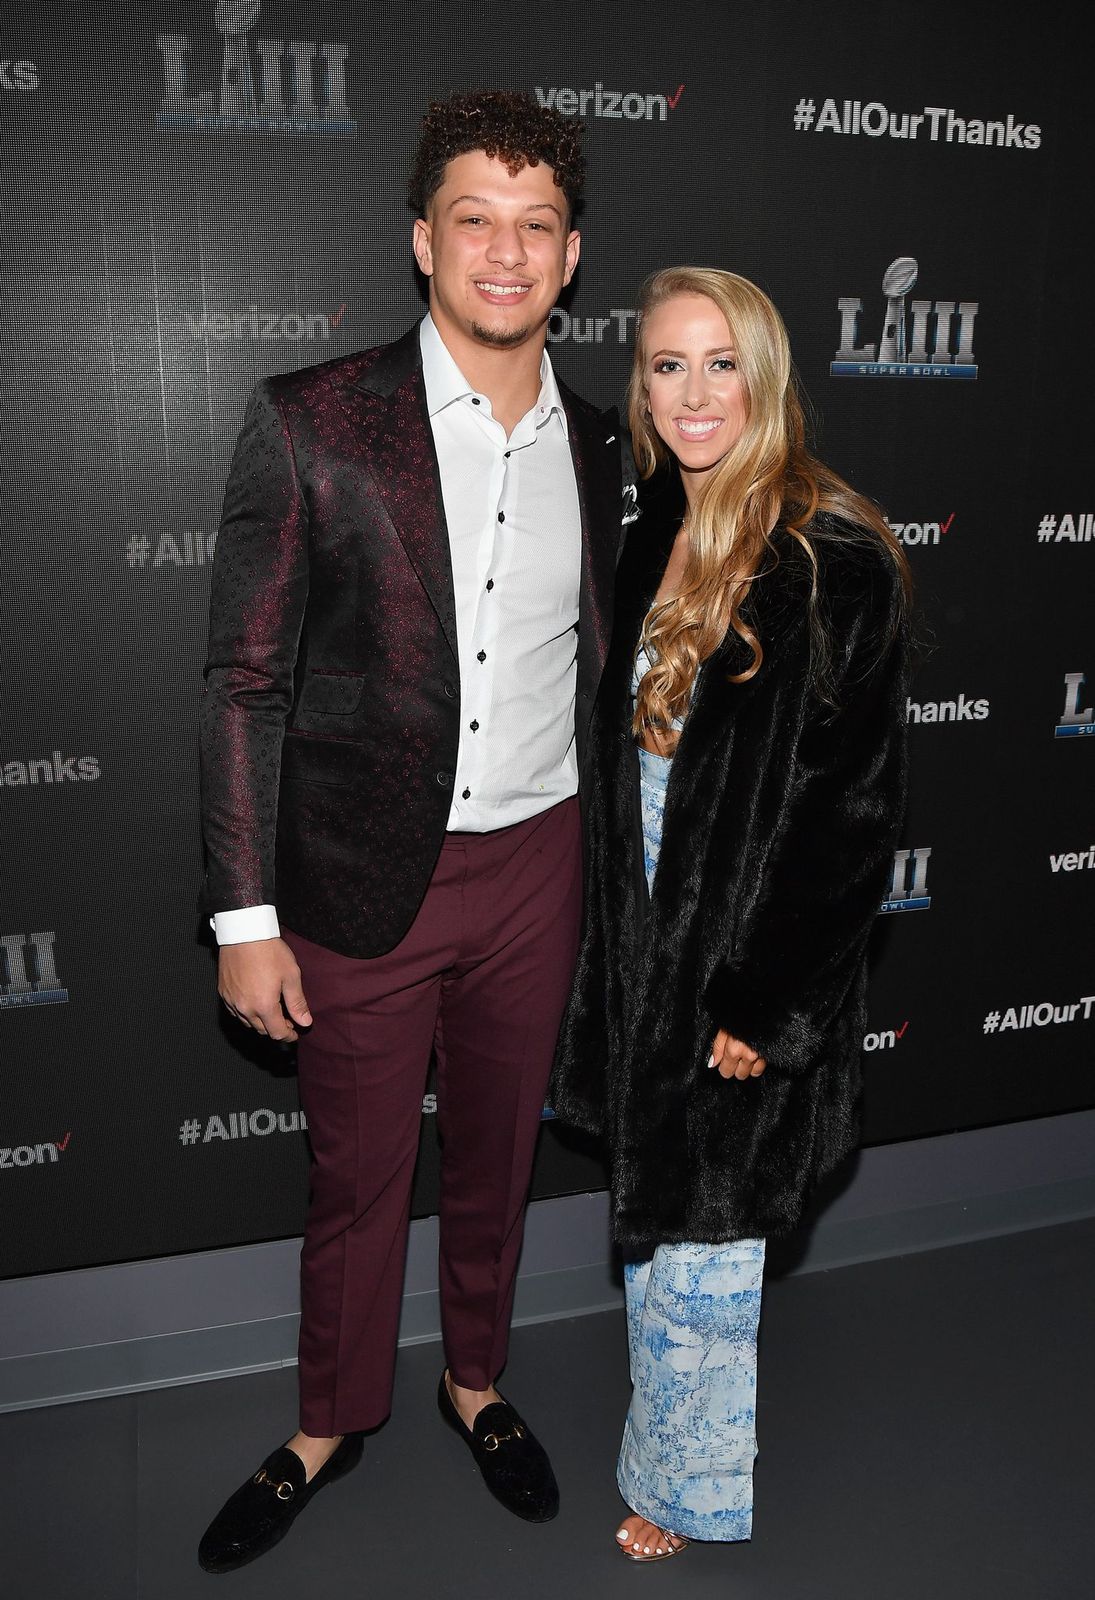 Patrick Mahomes II and Brittany Matthews at the world premiere event for "The Team That Wouldn't Be Here" documentary on January 31, 2019, in Atlanta, Georgia | Photo: Paras Griffin/Getty Images